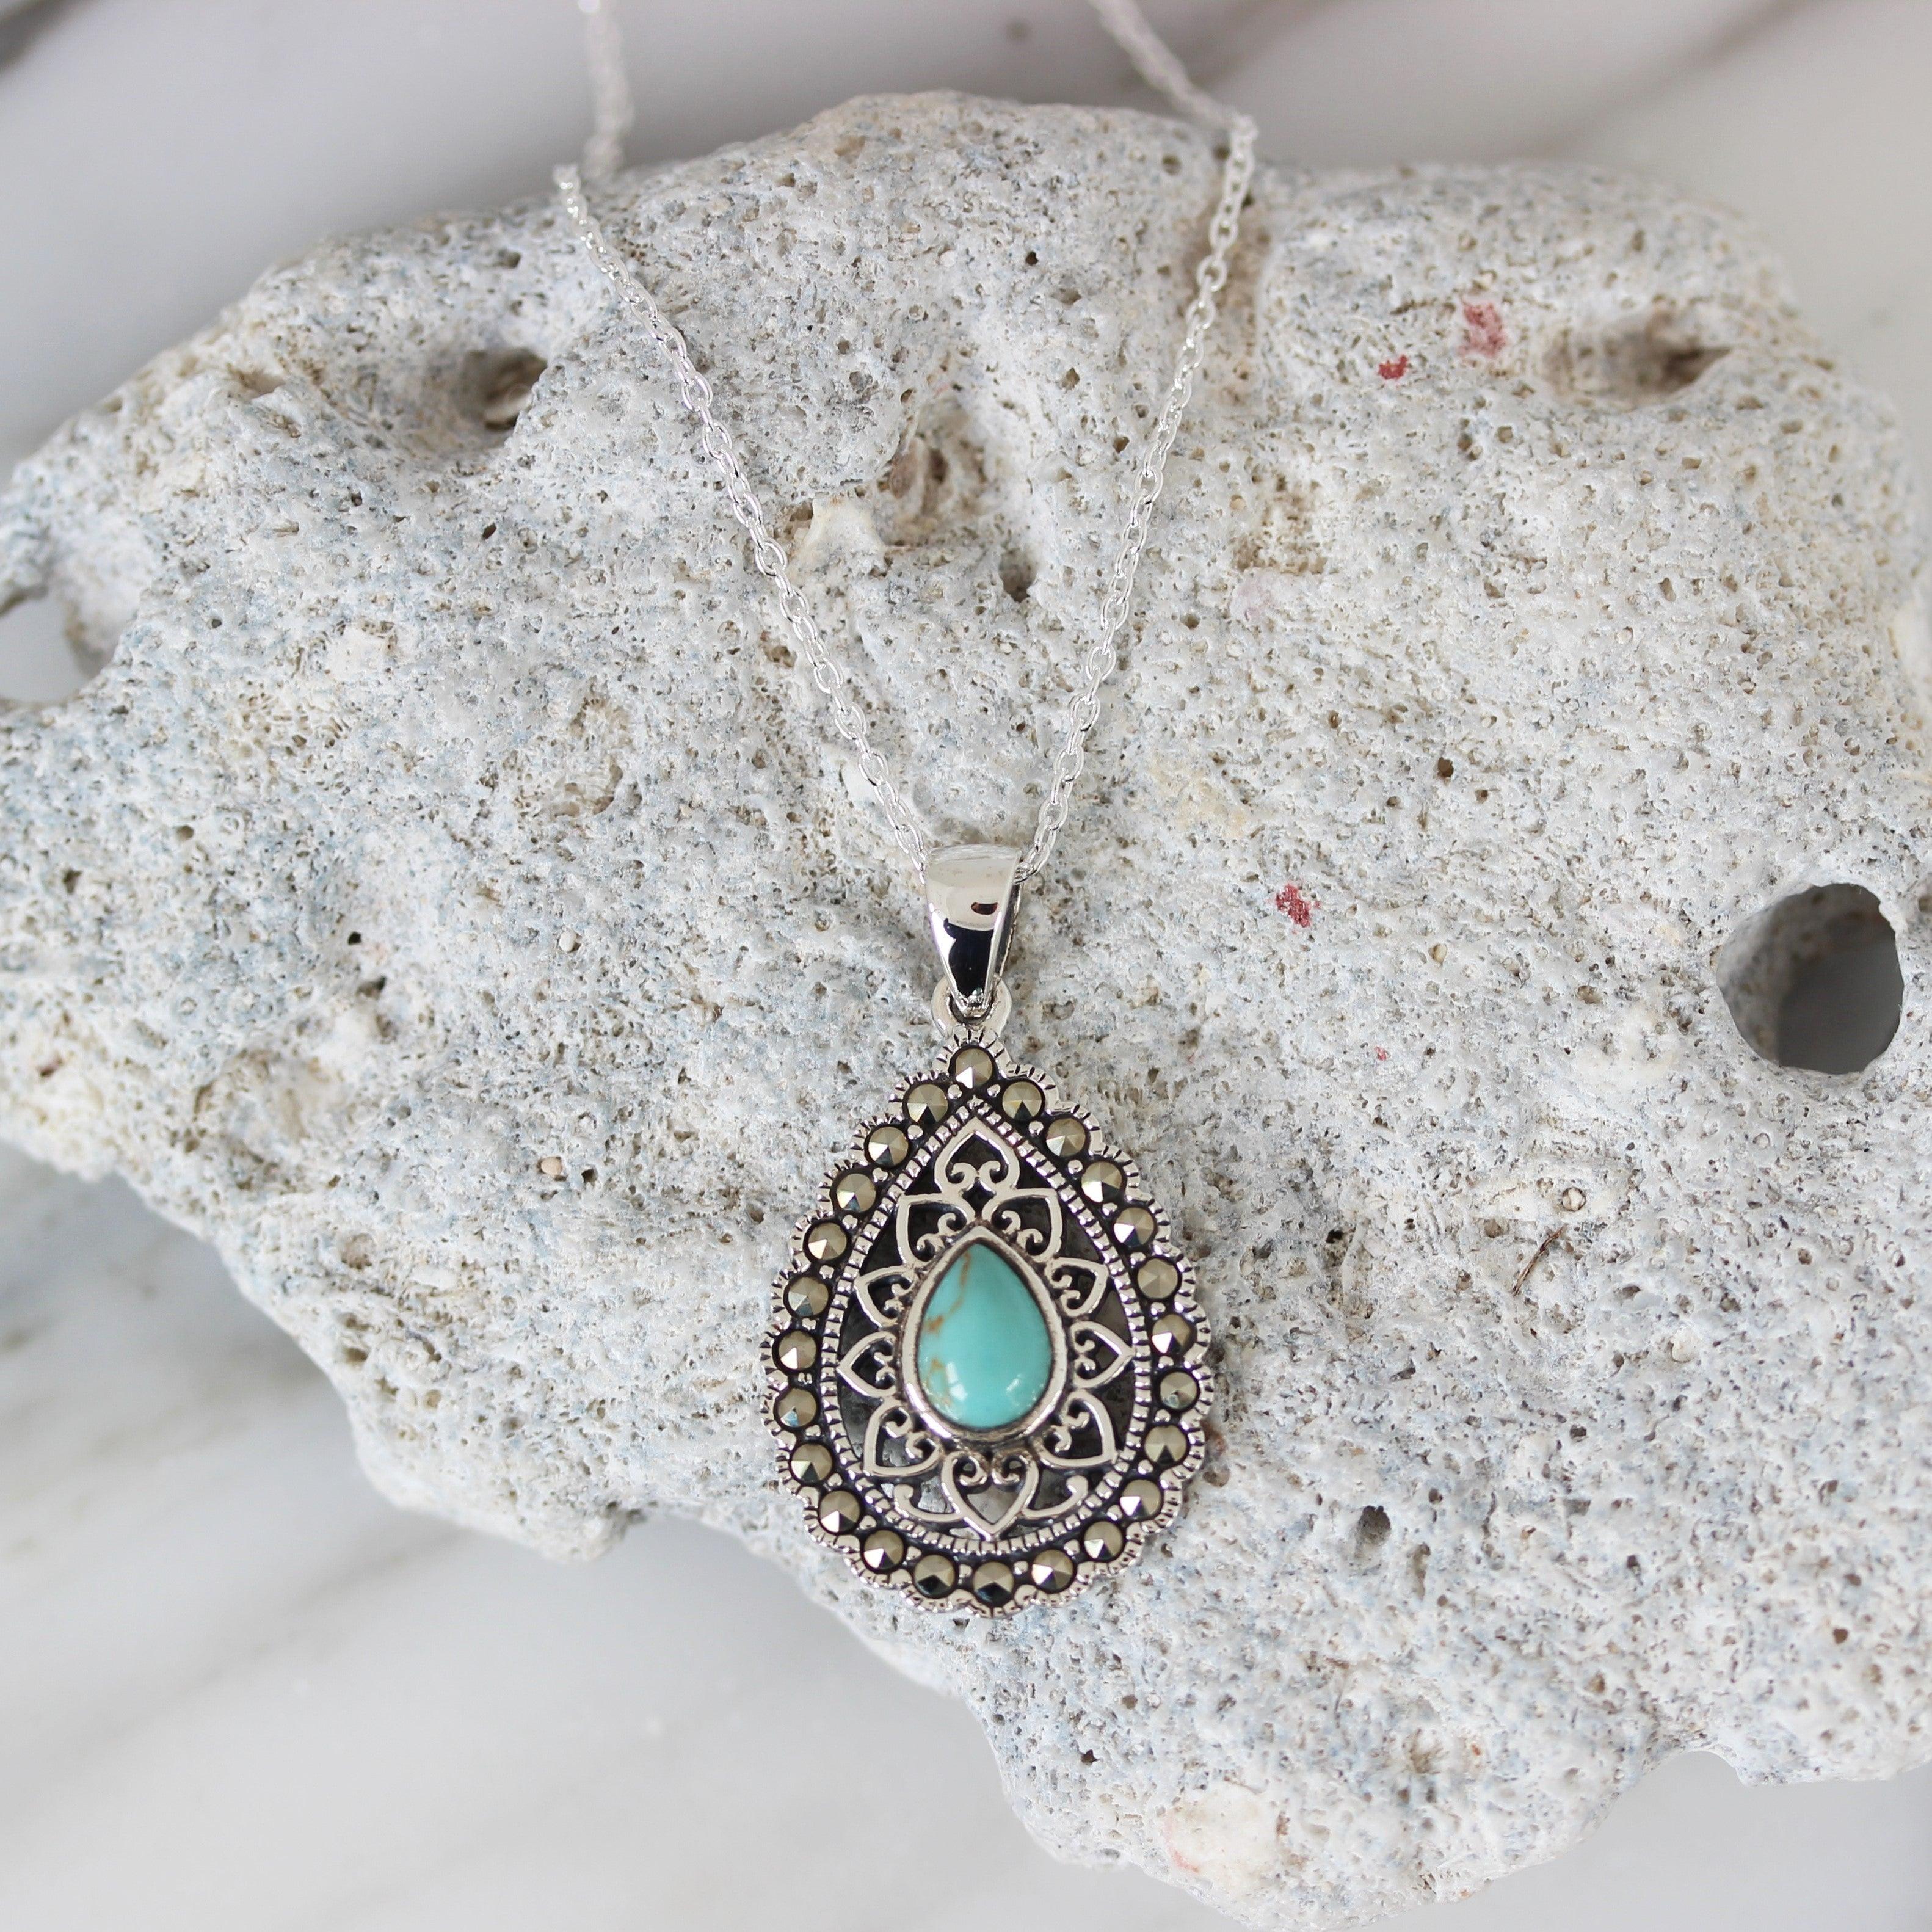 Sterling Silver Marcasite & Turquoise Teardrop Filigree Necklace 45cm - STERLING SILVER DESIGNS